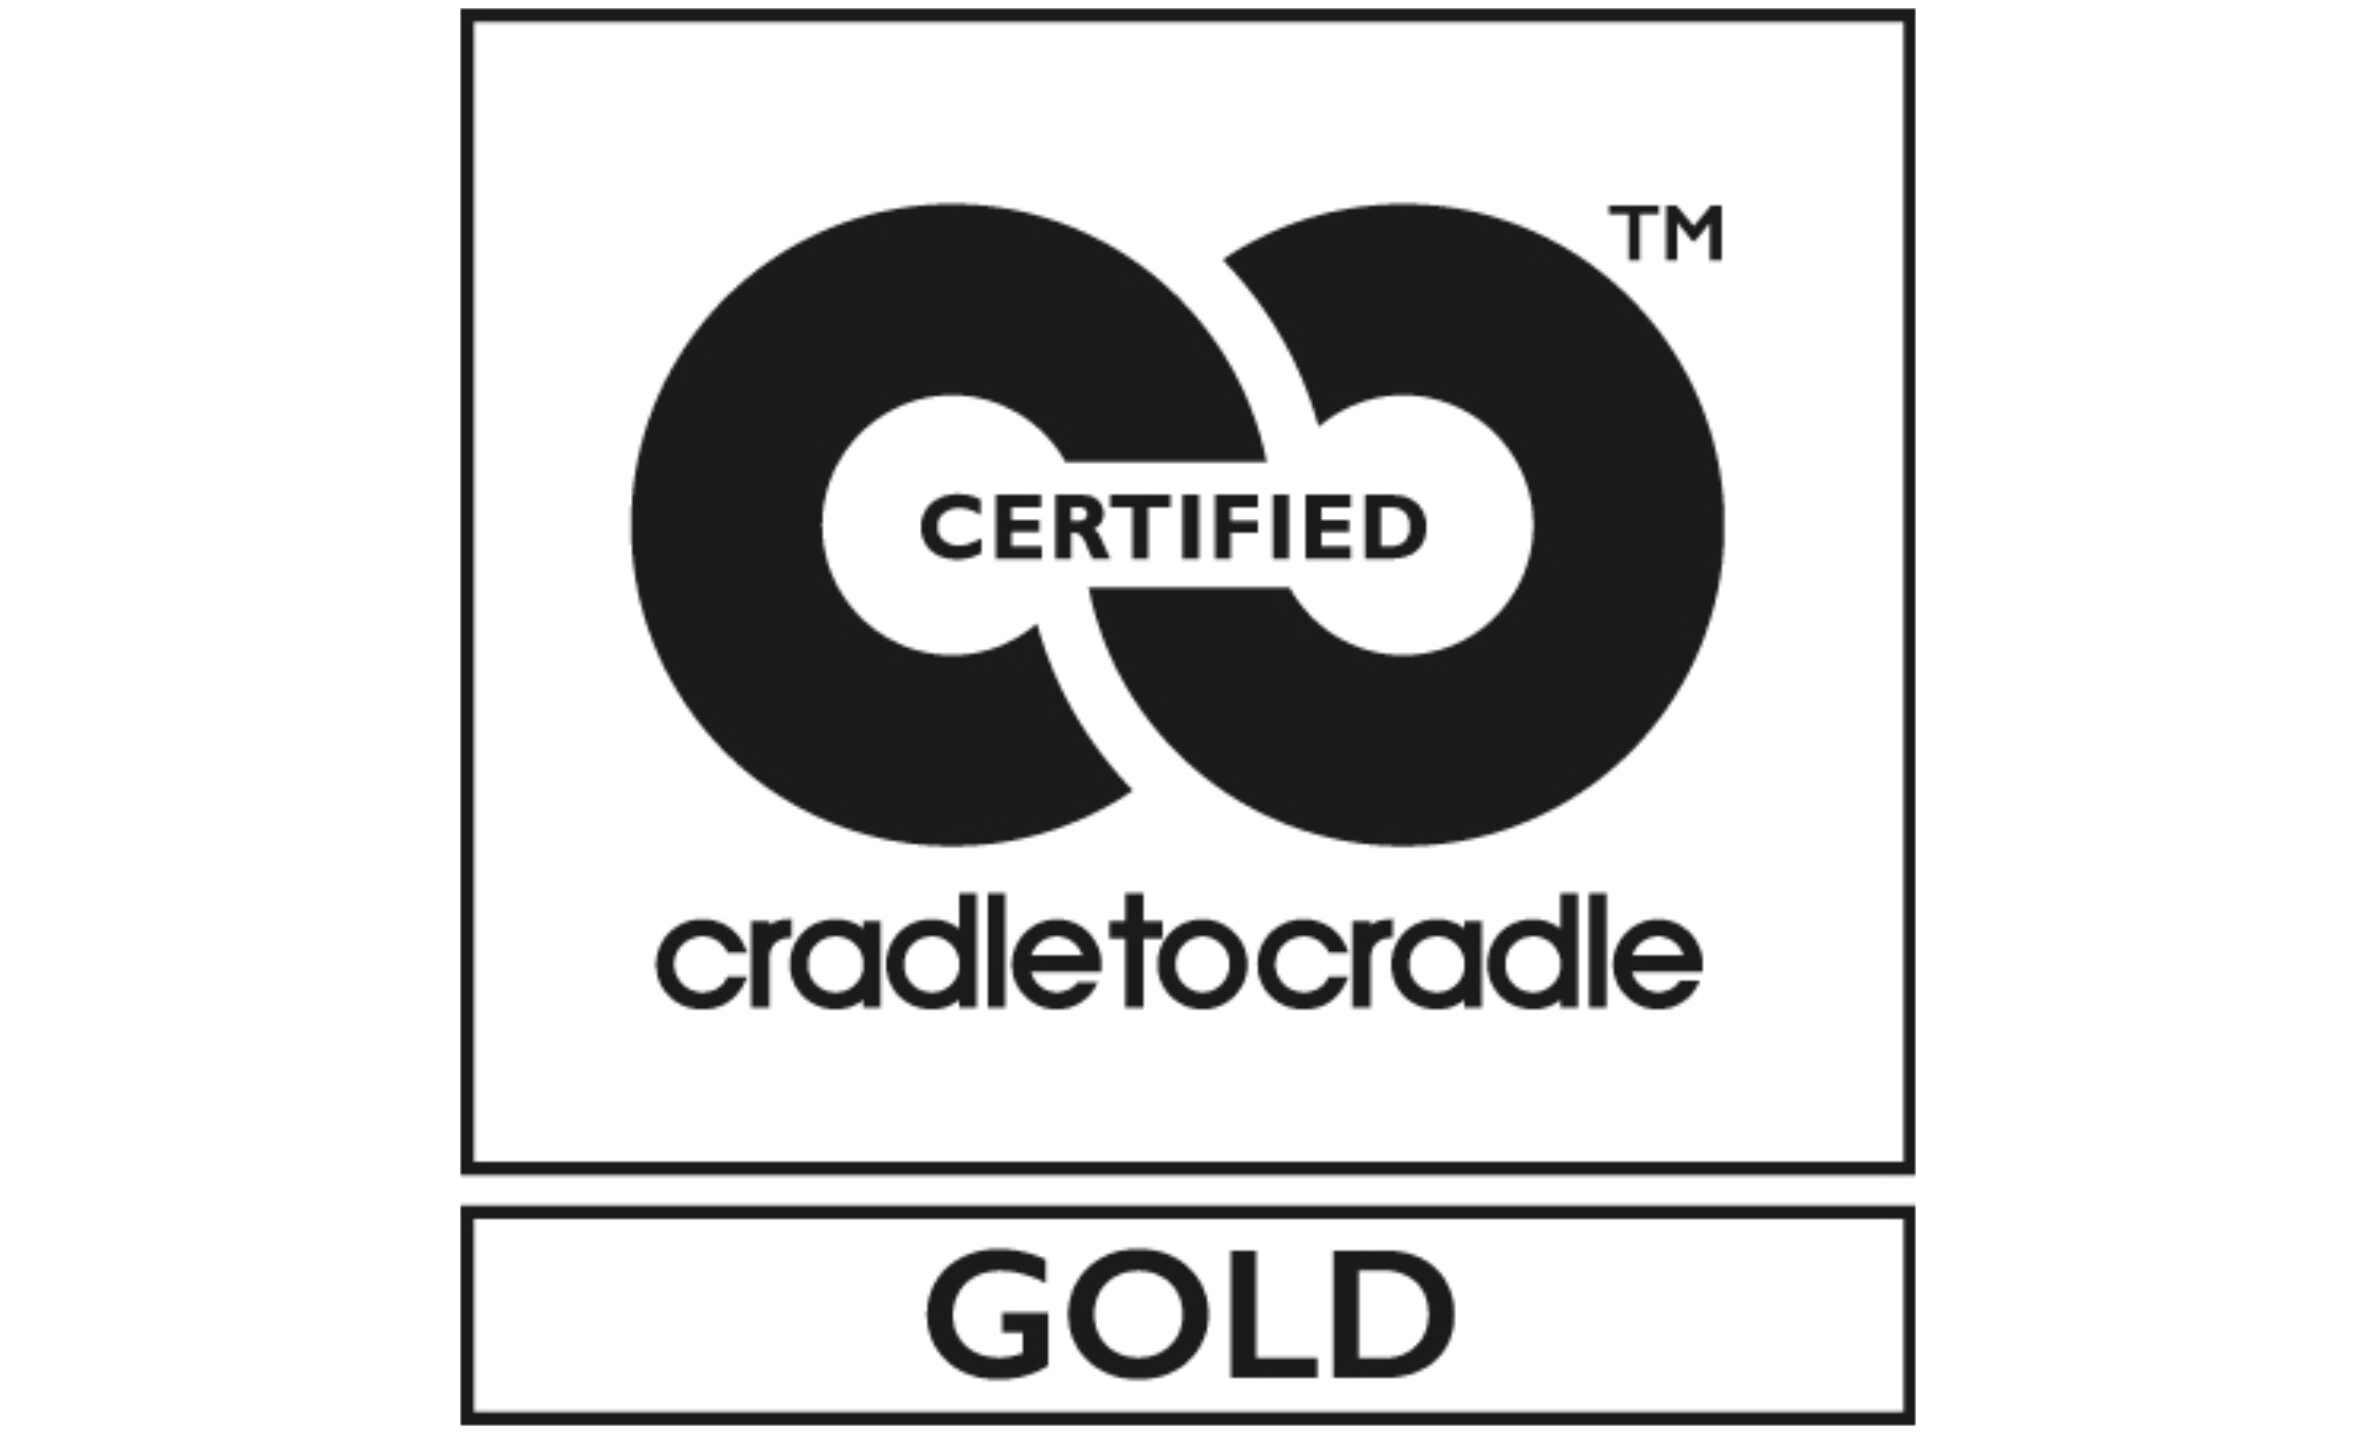 Cradle to Cradle gold certified